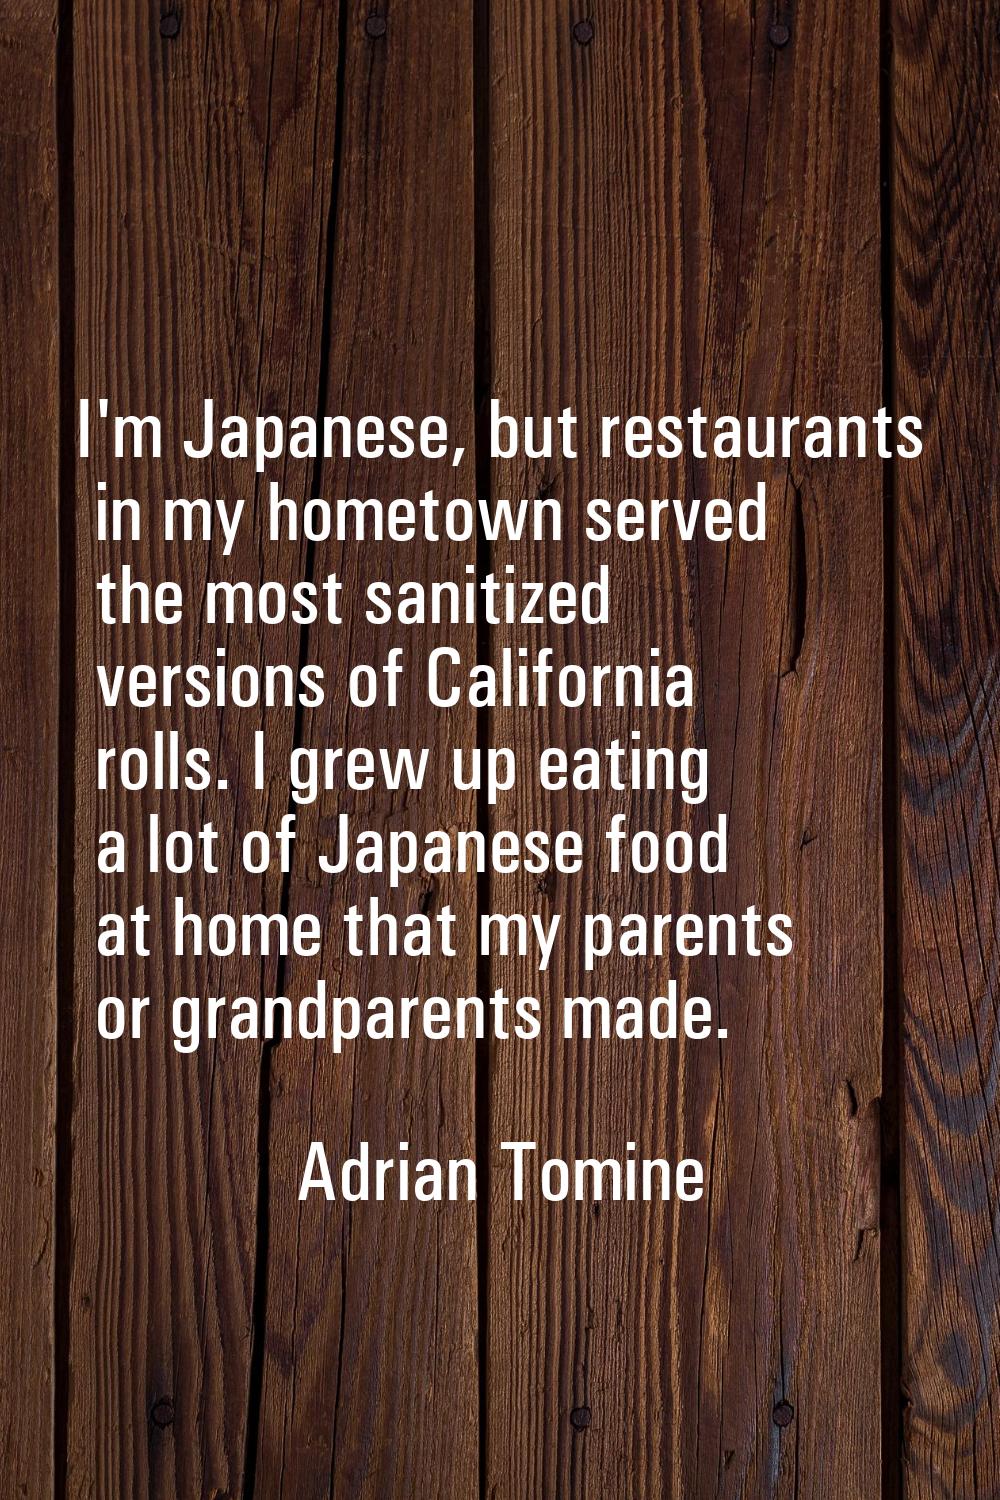 I'm Japanese, but restaurants in my hometown served the most sanitized versions of California rolls